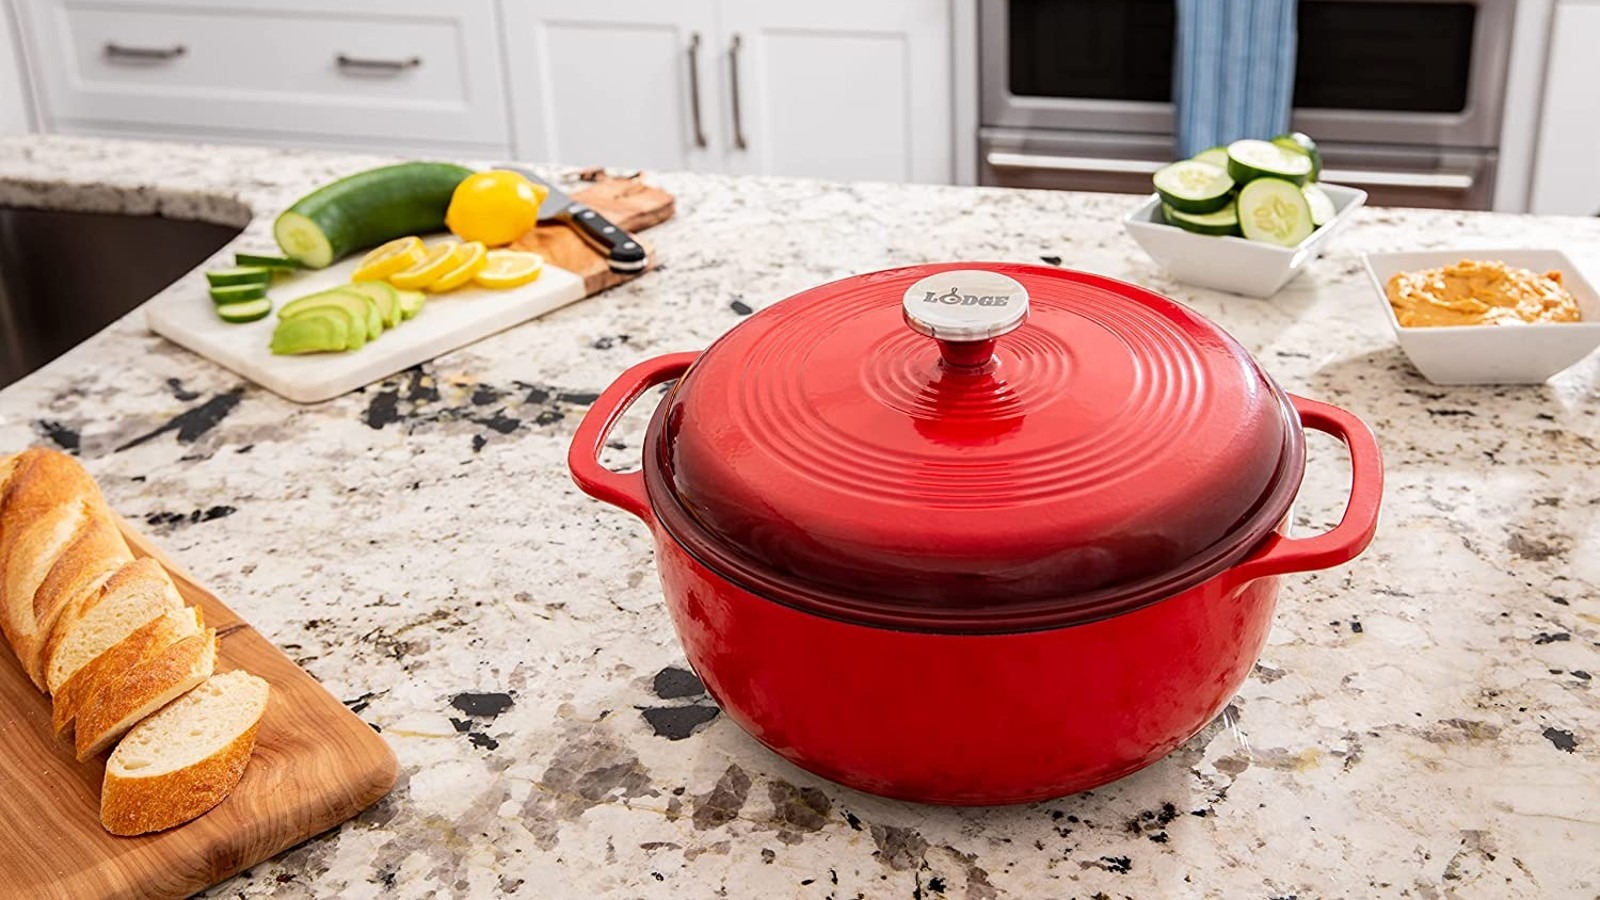 LODGE Brick Red Enameled Cast Iron 6 Qt Dutch Oven Cook Pot With